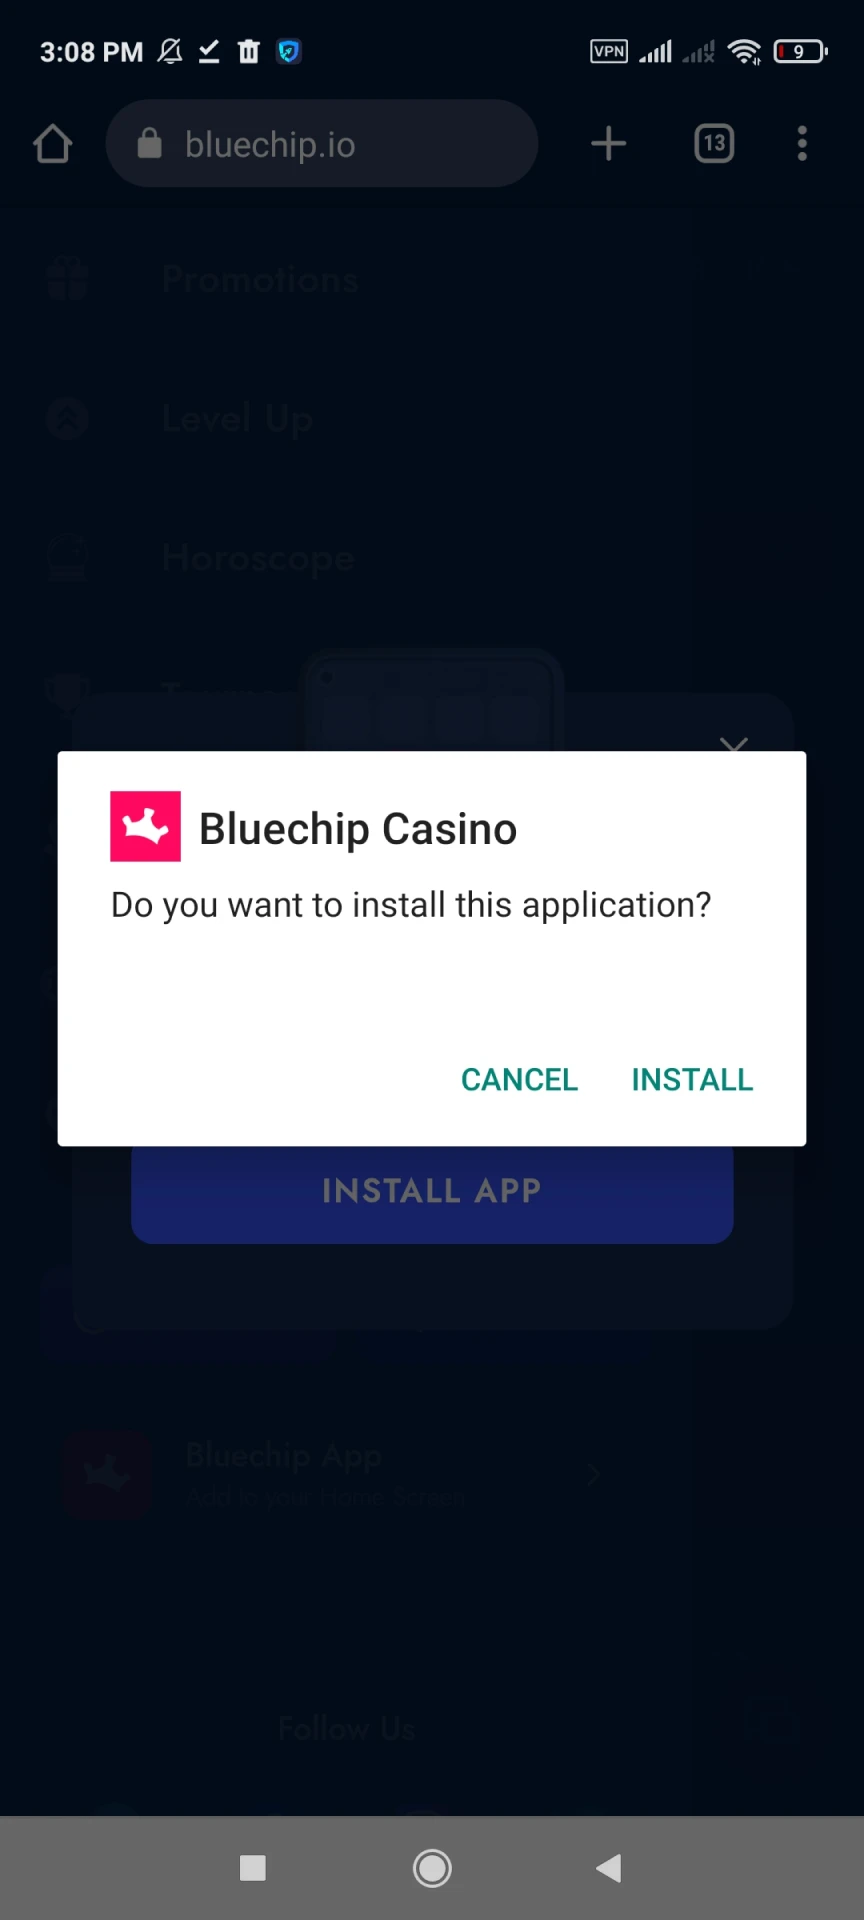 Install the Bluechip app on your smartphone.